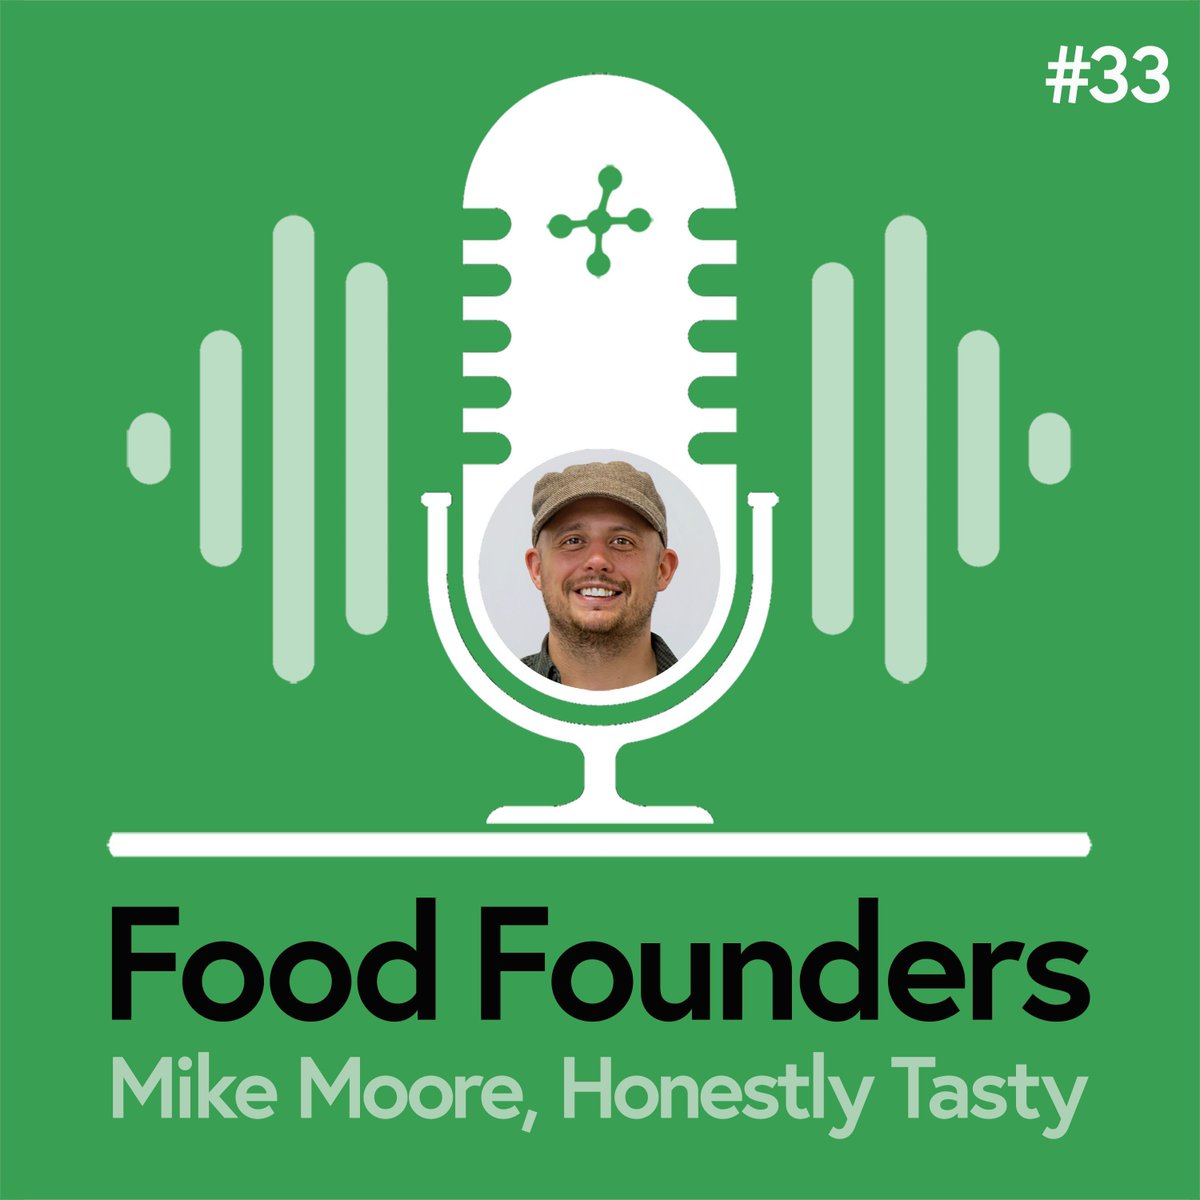 All about creating and scaling @honestly_tasty, the plant-based cheese loved by vegans and non-vegans alike buff.ly/49upbCj

#foodbusiness #foodpodcast #foodtech #vegan #plantbased #vegancheese #shamembert #foodfounders #foodbusiness #freefrom #seedrs #podcast